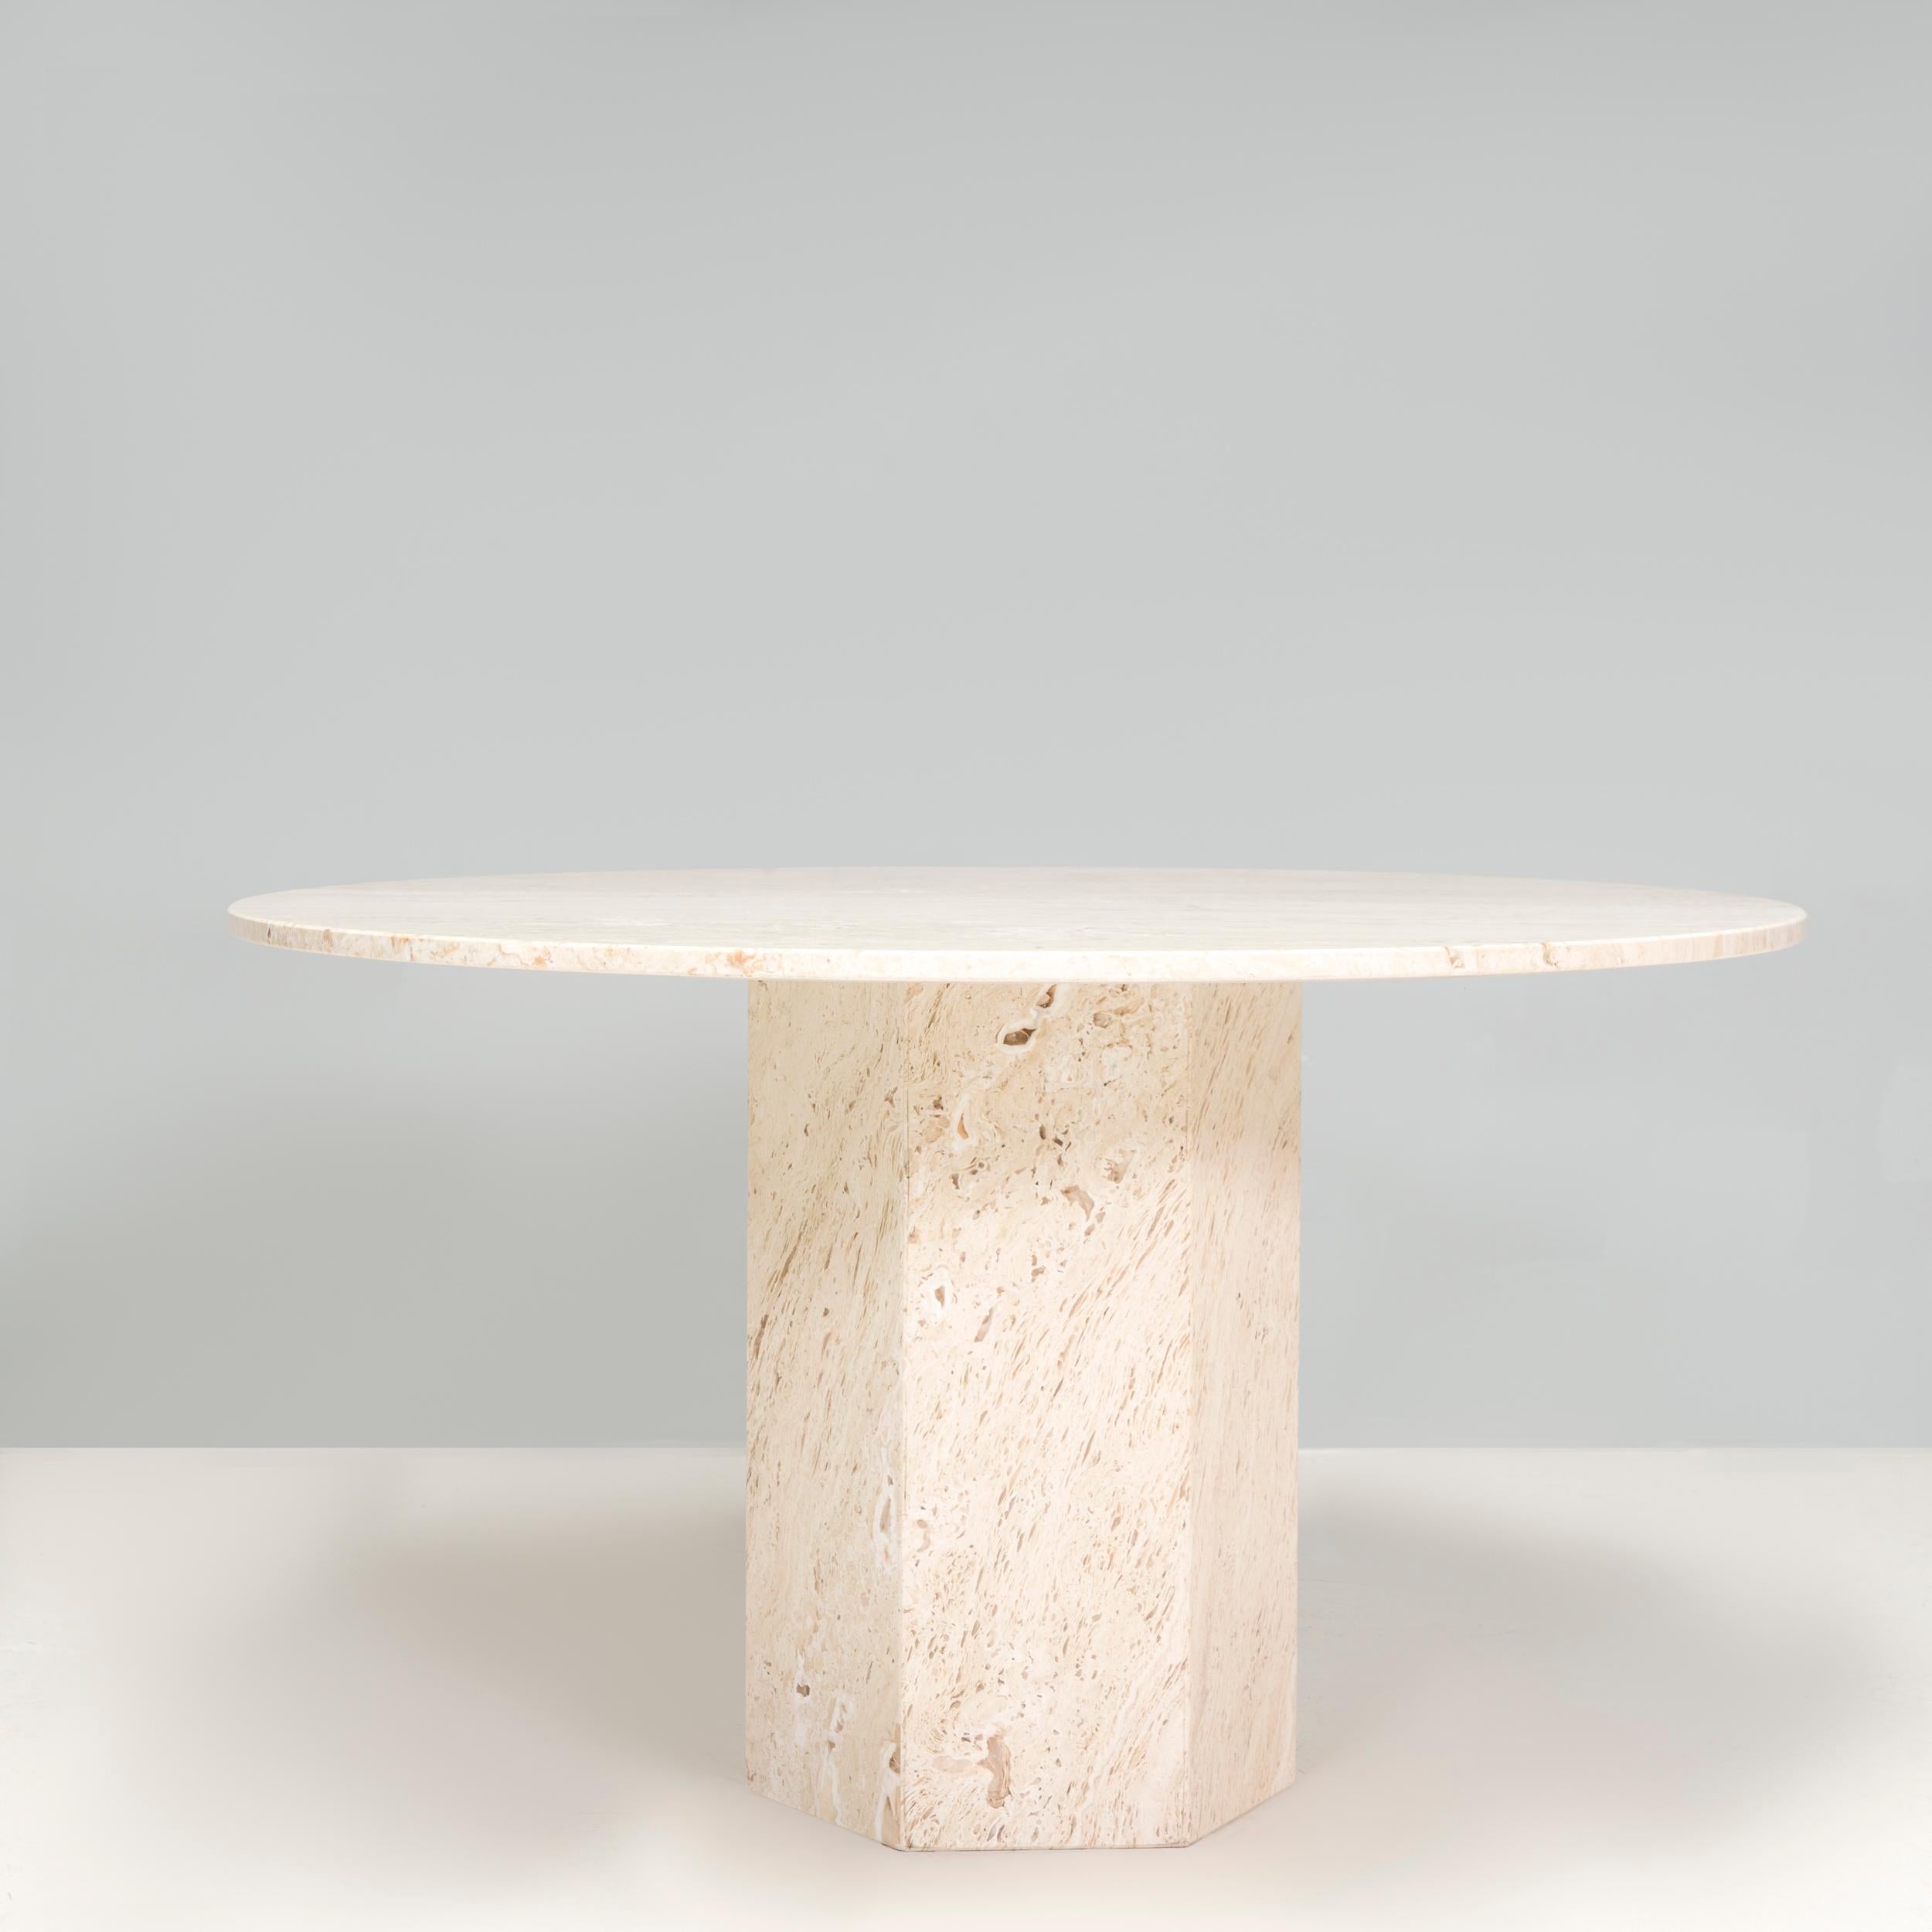 Originally designed in 2020 by GamFratesi for Gubi, the Epic dining table is inspired by ancient Greek columns and Roman architecture.  Constructed completely from natural white travertine, the dining table features a hexagonal column base, balanced